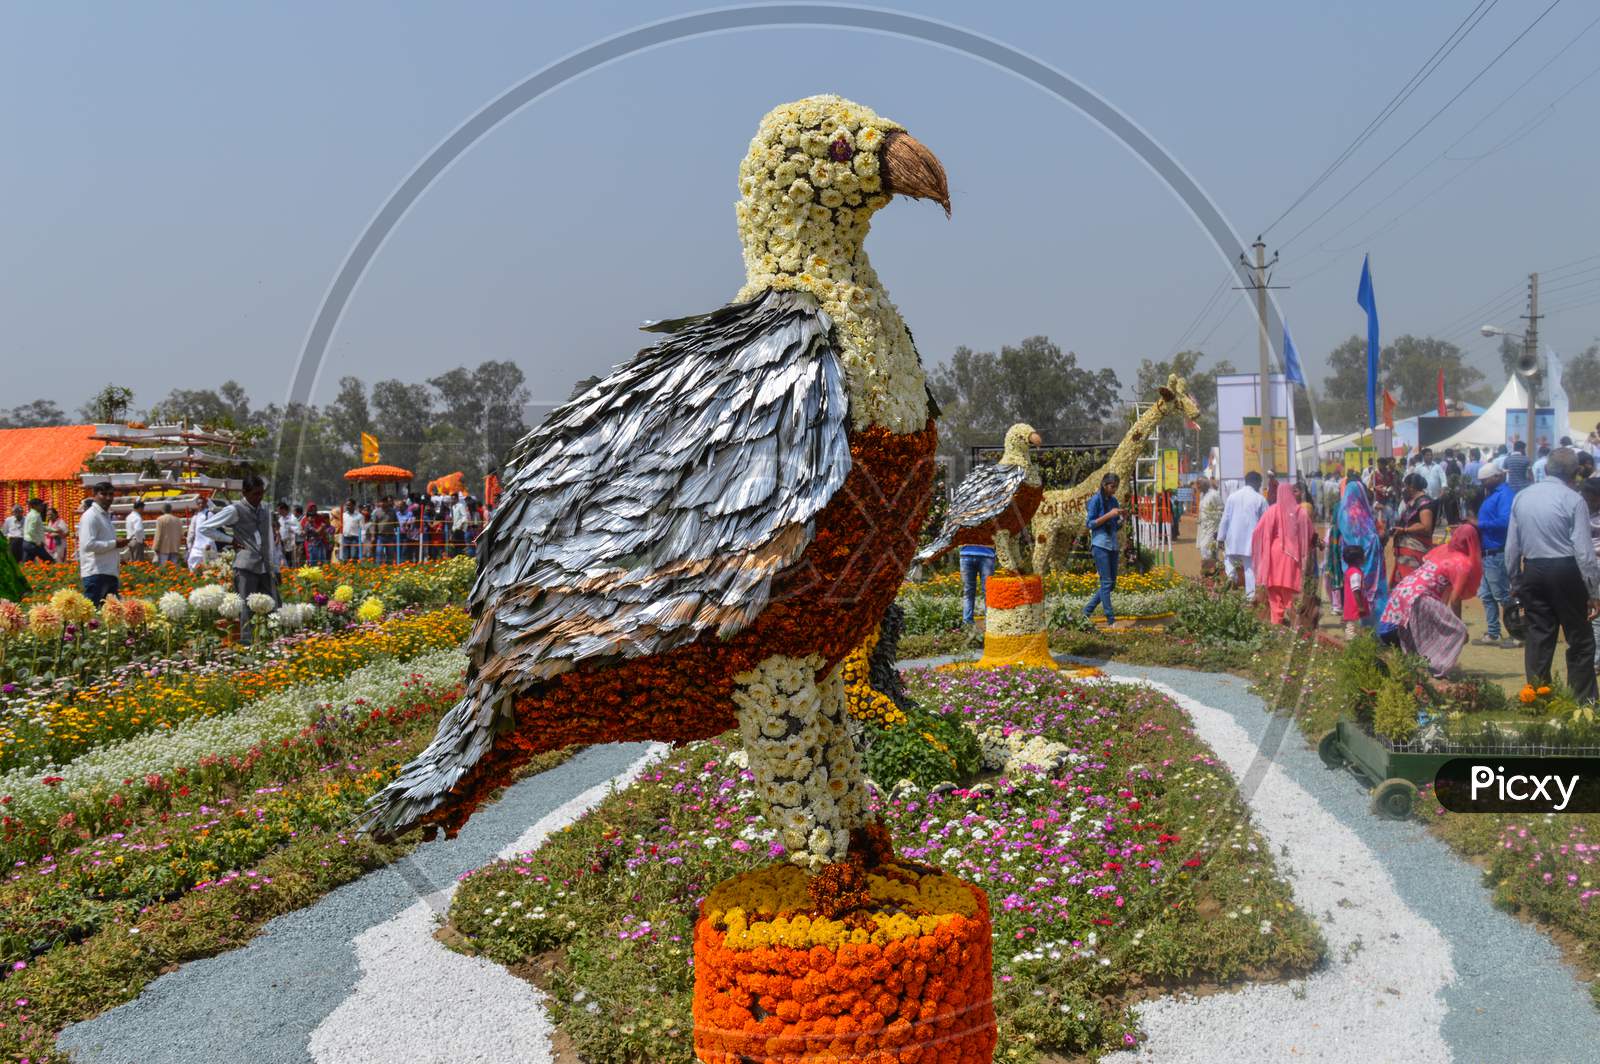 The Eagle Which Is Made Of Cotton And News Paper, Flowers Are There For Exhibition At Pusa, Agriculture Festival, New Delhi.